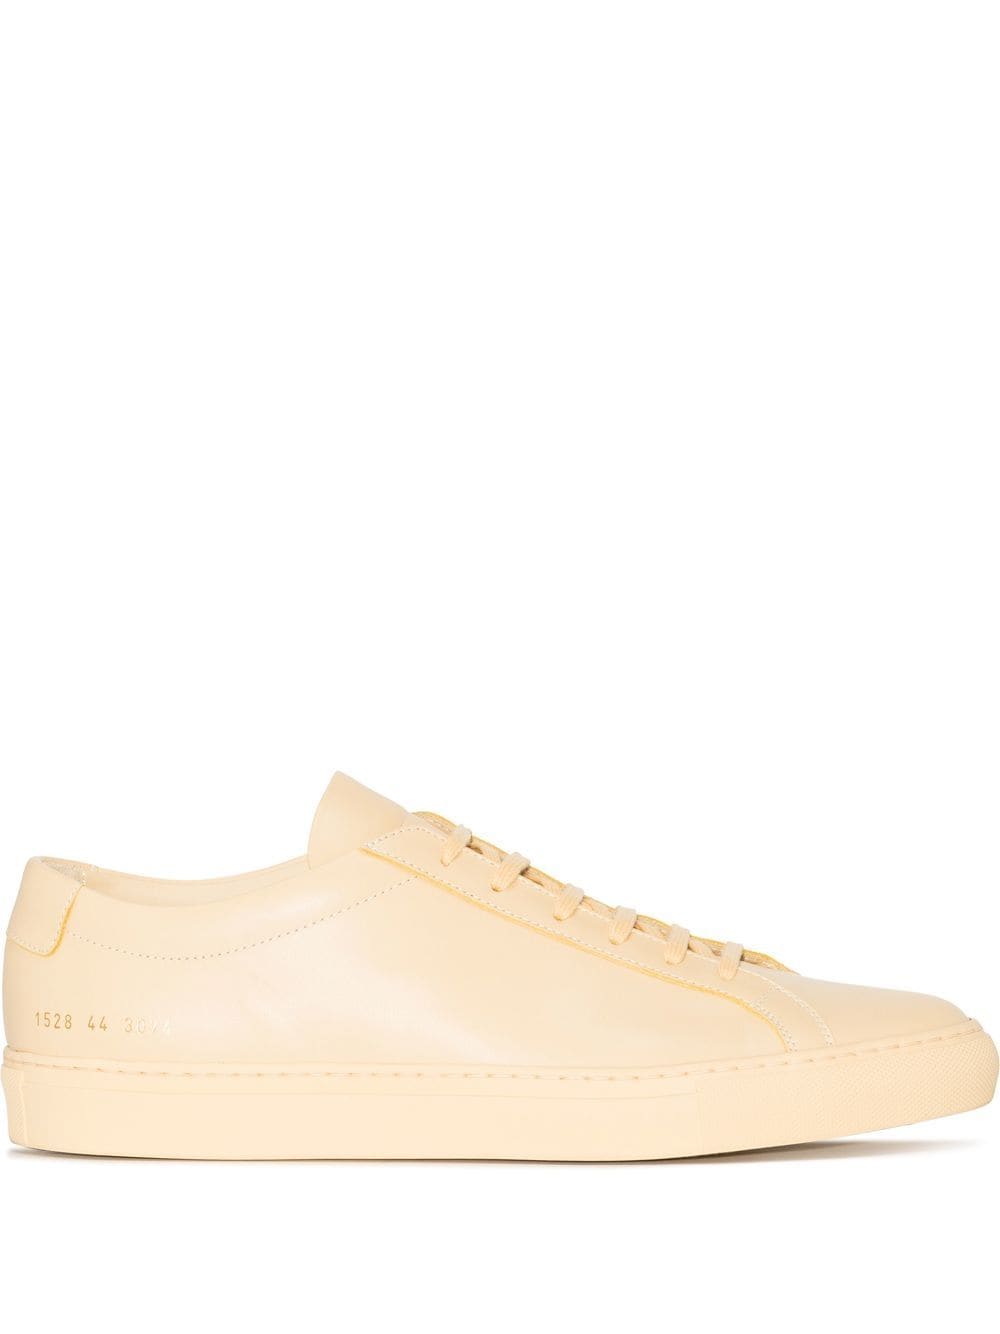 Common Projects Achilles low-top sneakers - Yellow von Common Projects